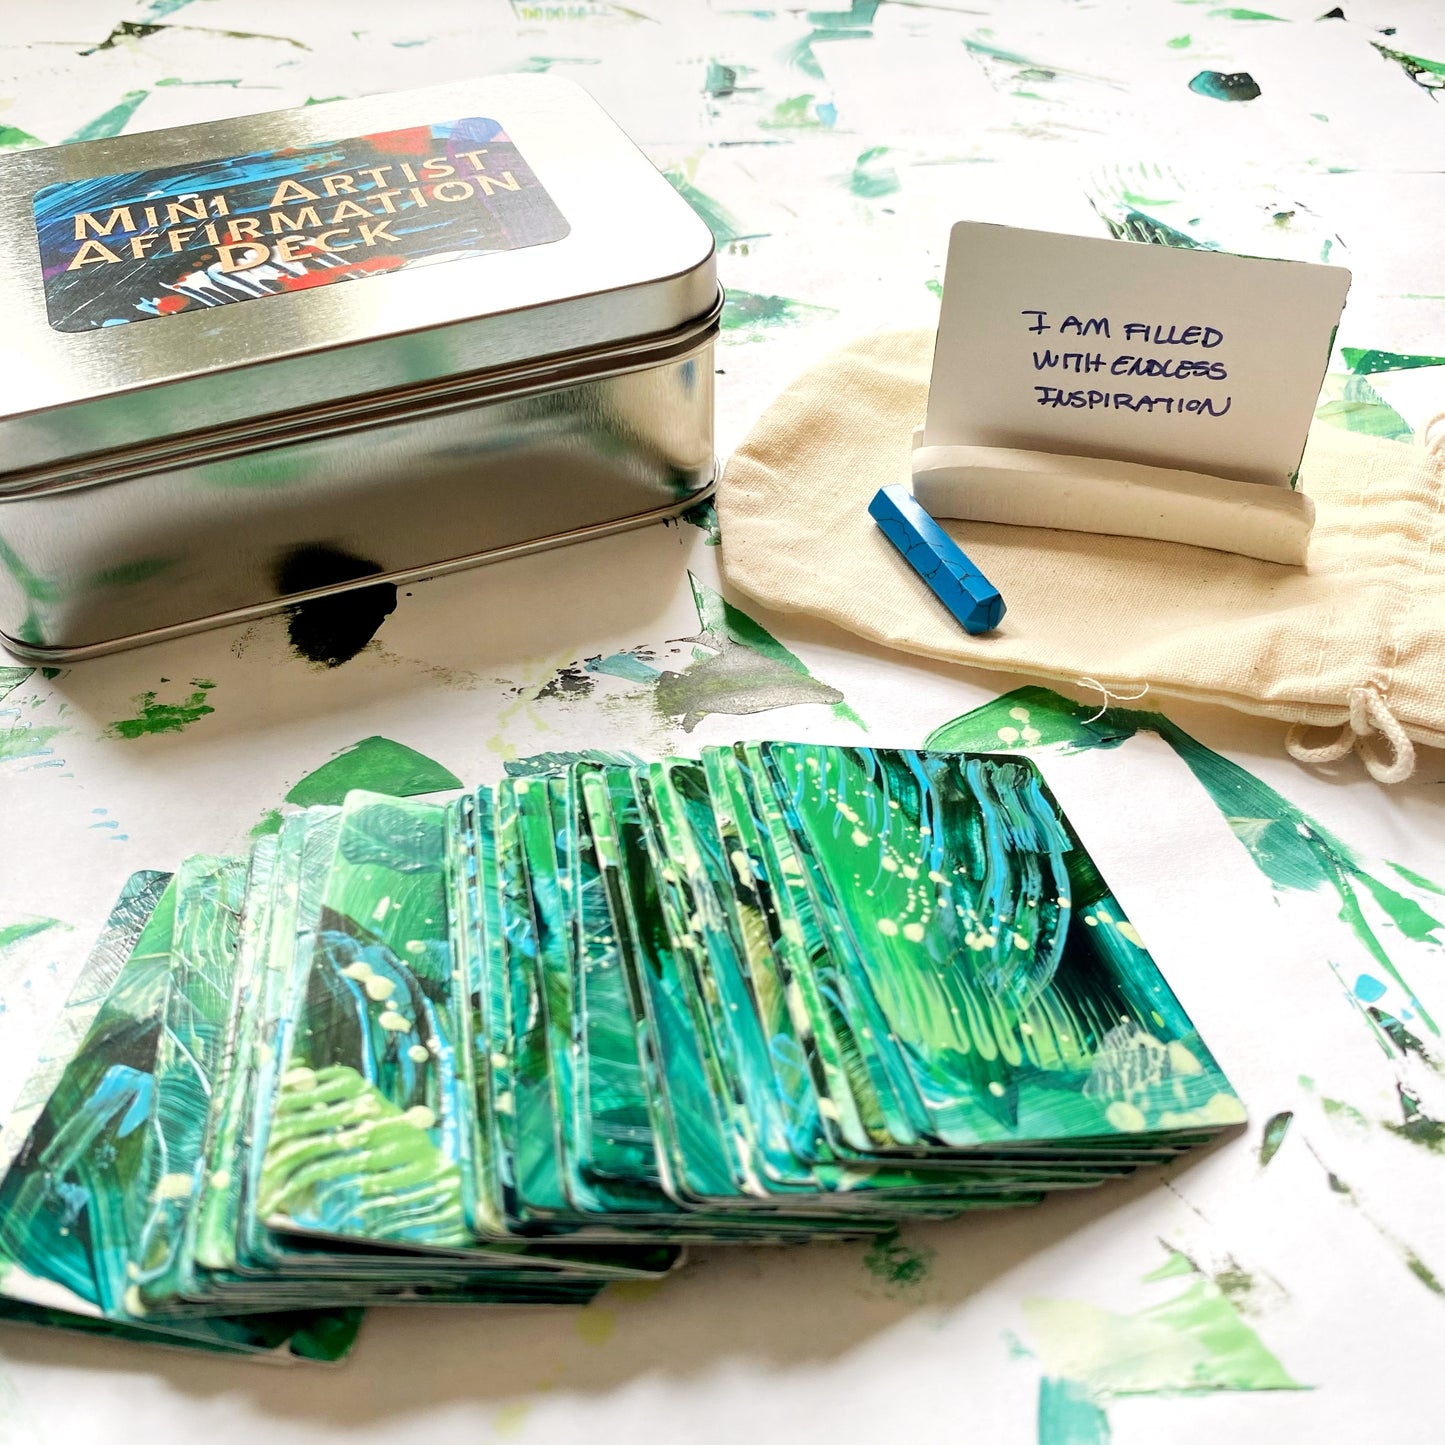 Mini Abstract Artist Affirmation Cards - Equinox